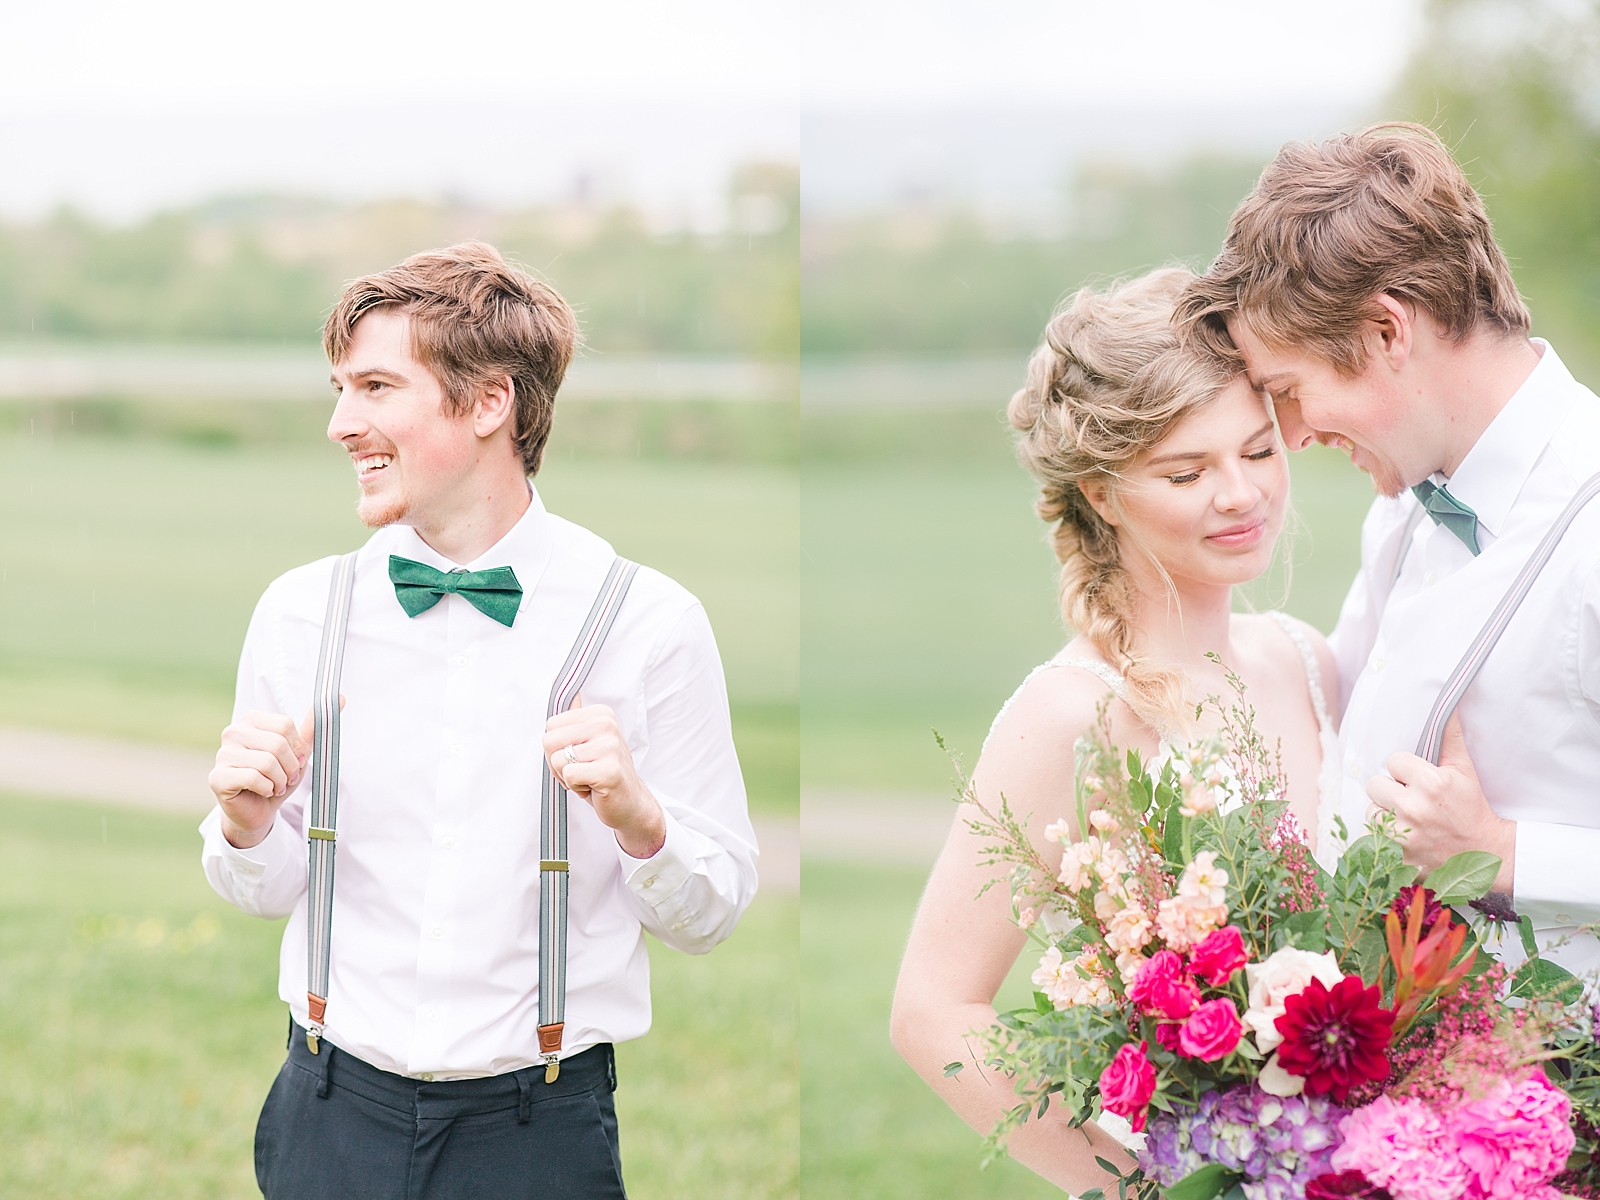 Hiwassee Farm Venue Wedding Groom with Suspenders and Bride and Groom Snuggling Photos